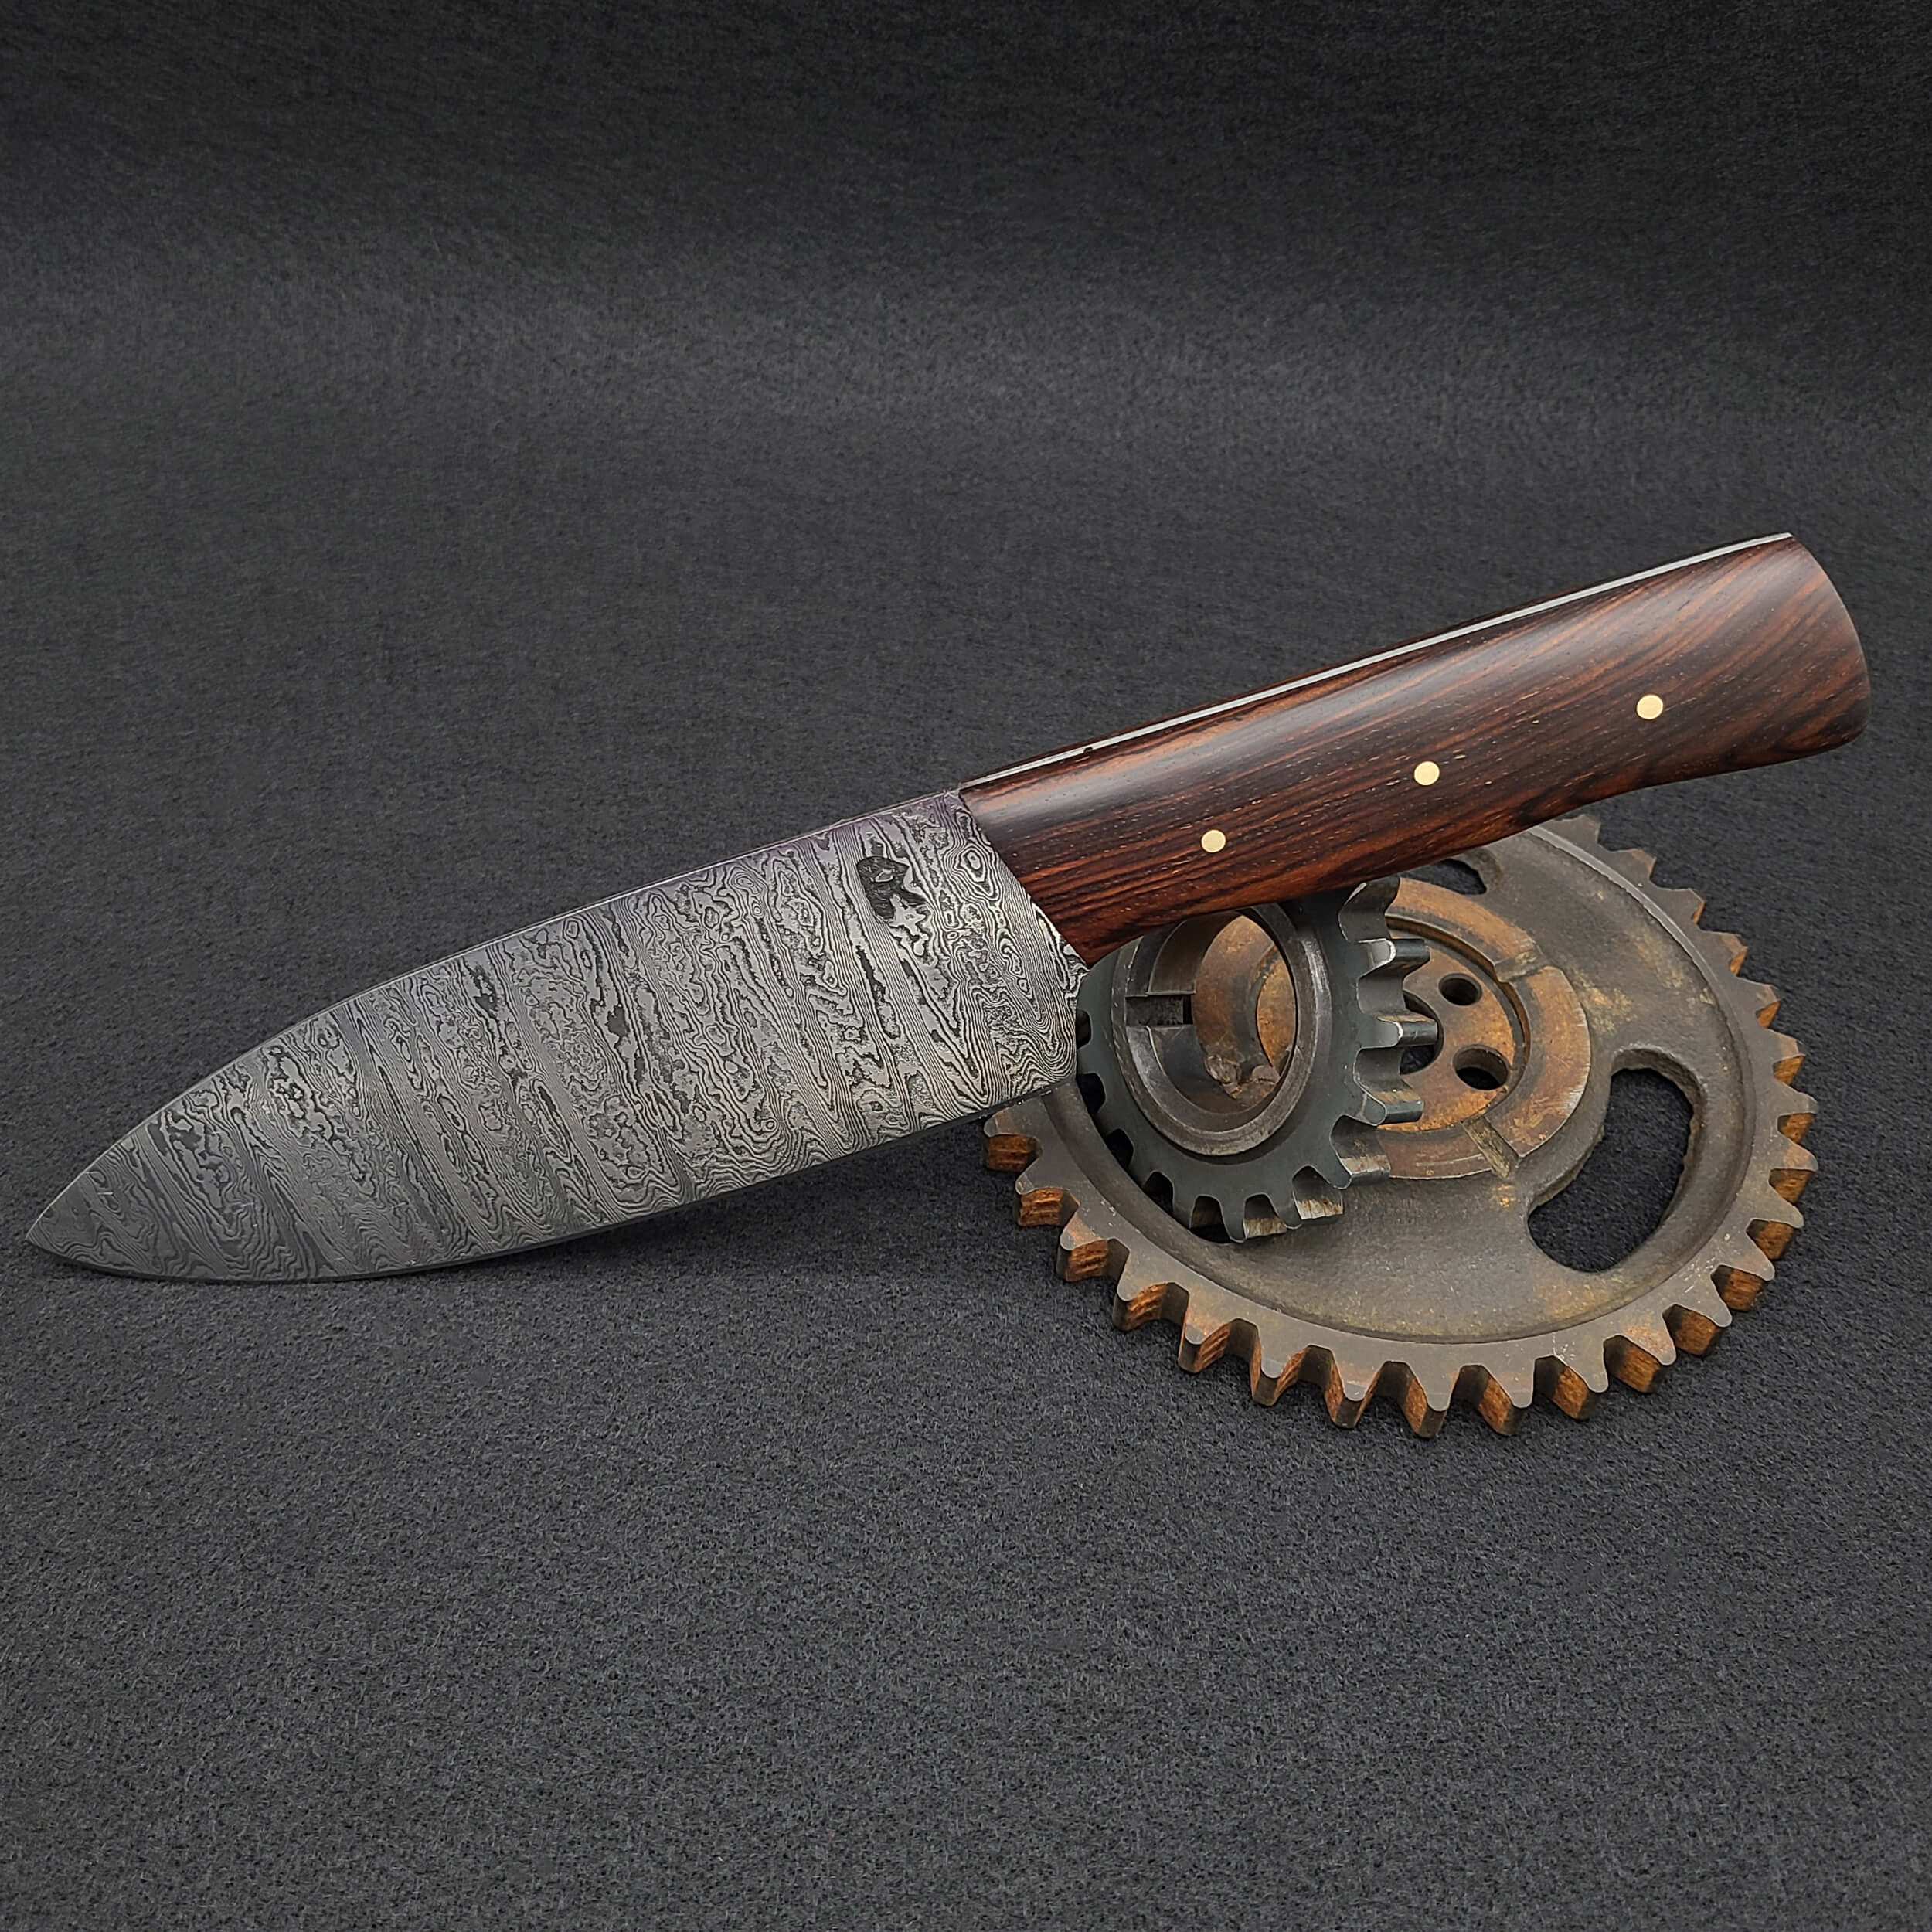 About Hand-Forged Damascus Chef Knives